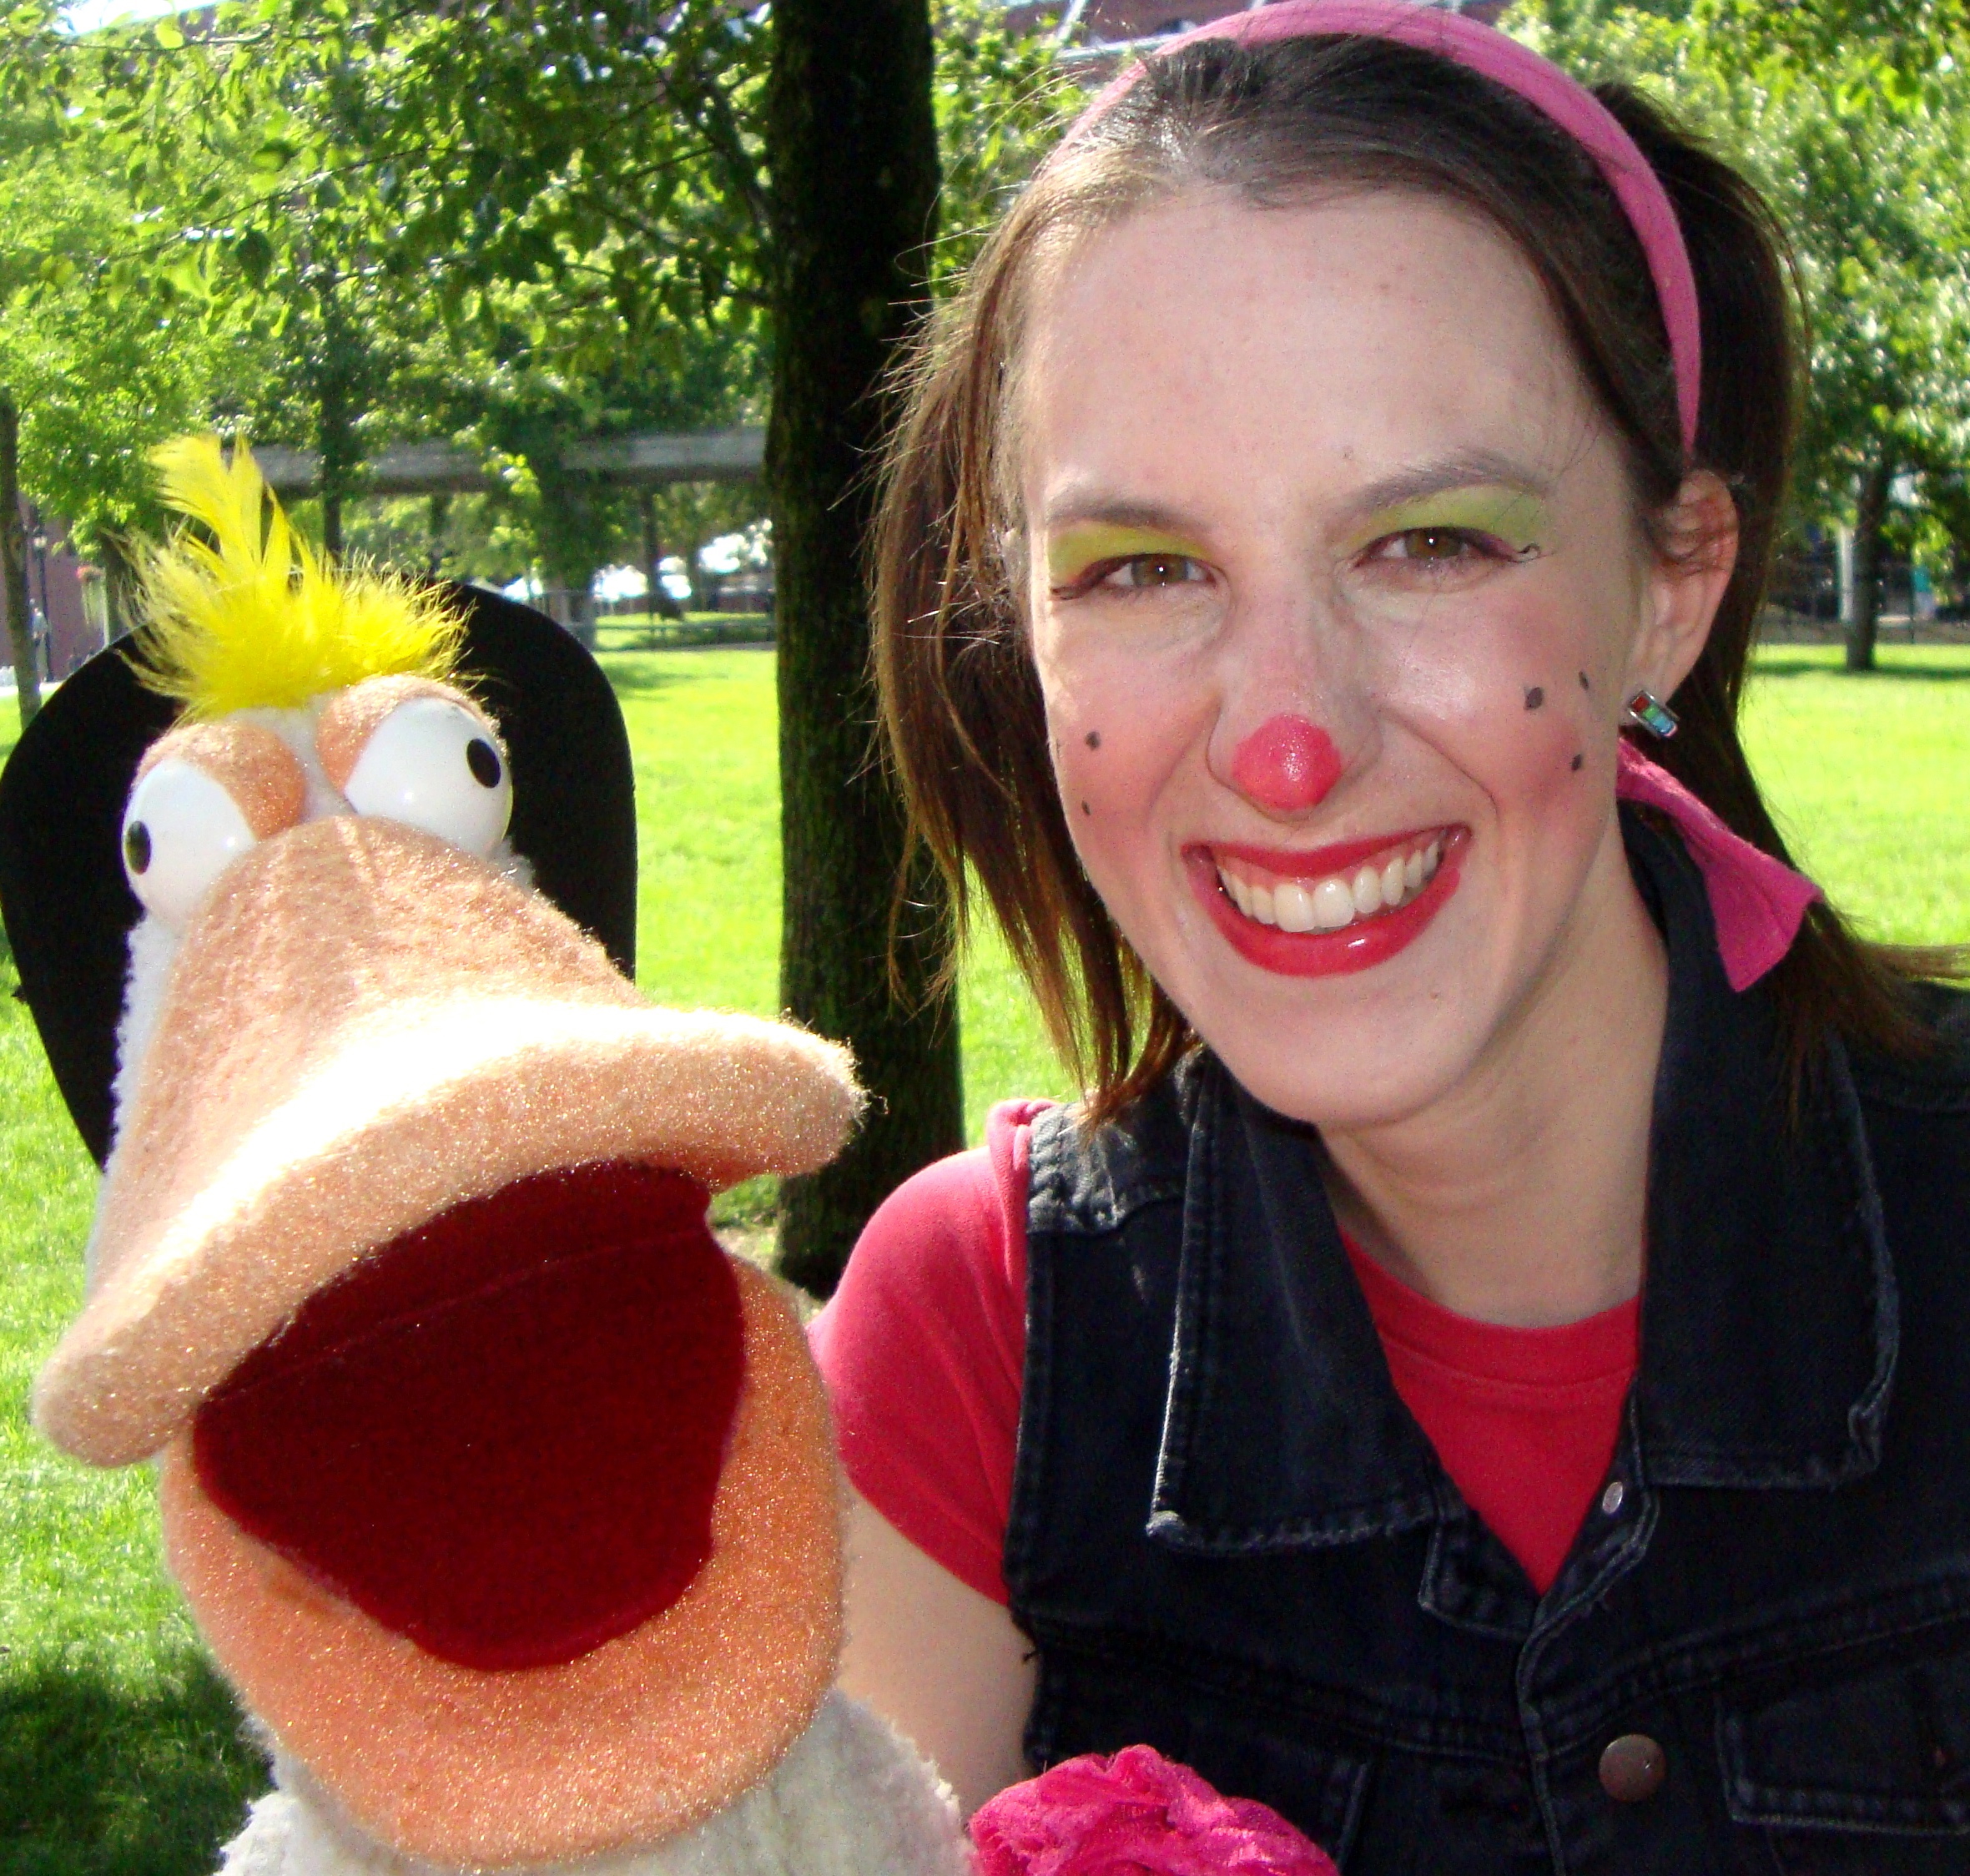 A woman with face paint smiles next to a duck puppet.